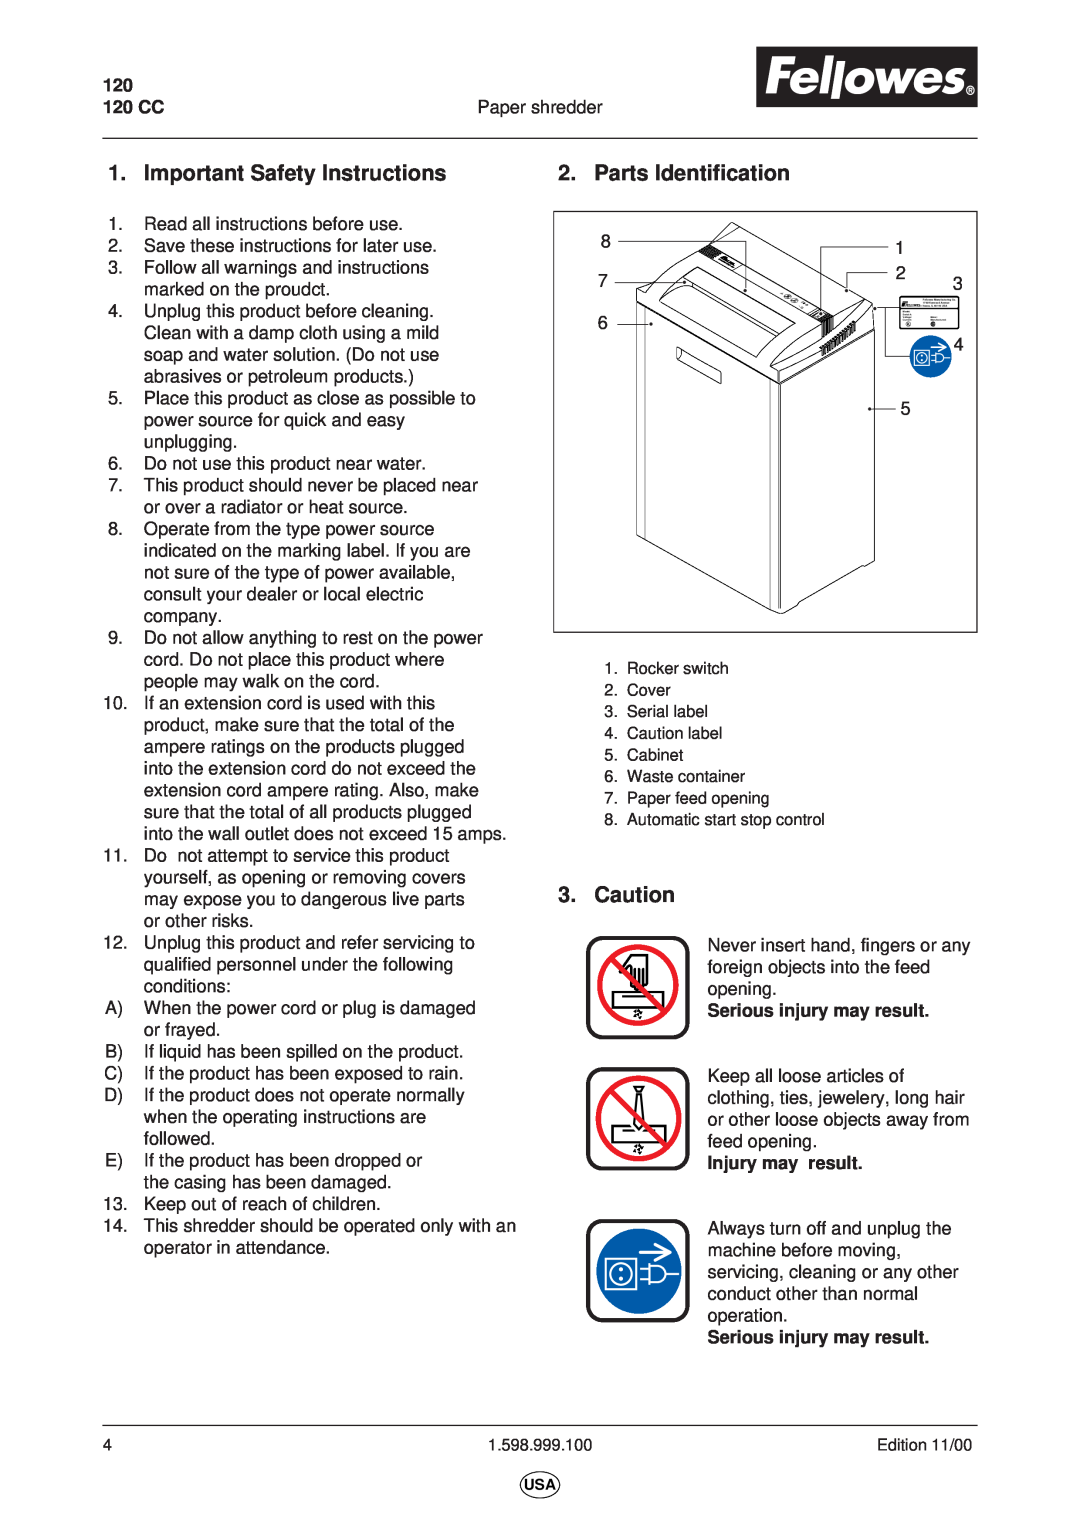 Fellowes 120CC Important Safety Instructions, Parts Identification, Caution, 120 CC, Paper shredder, Injury may result 